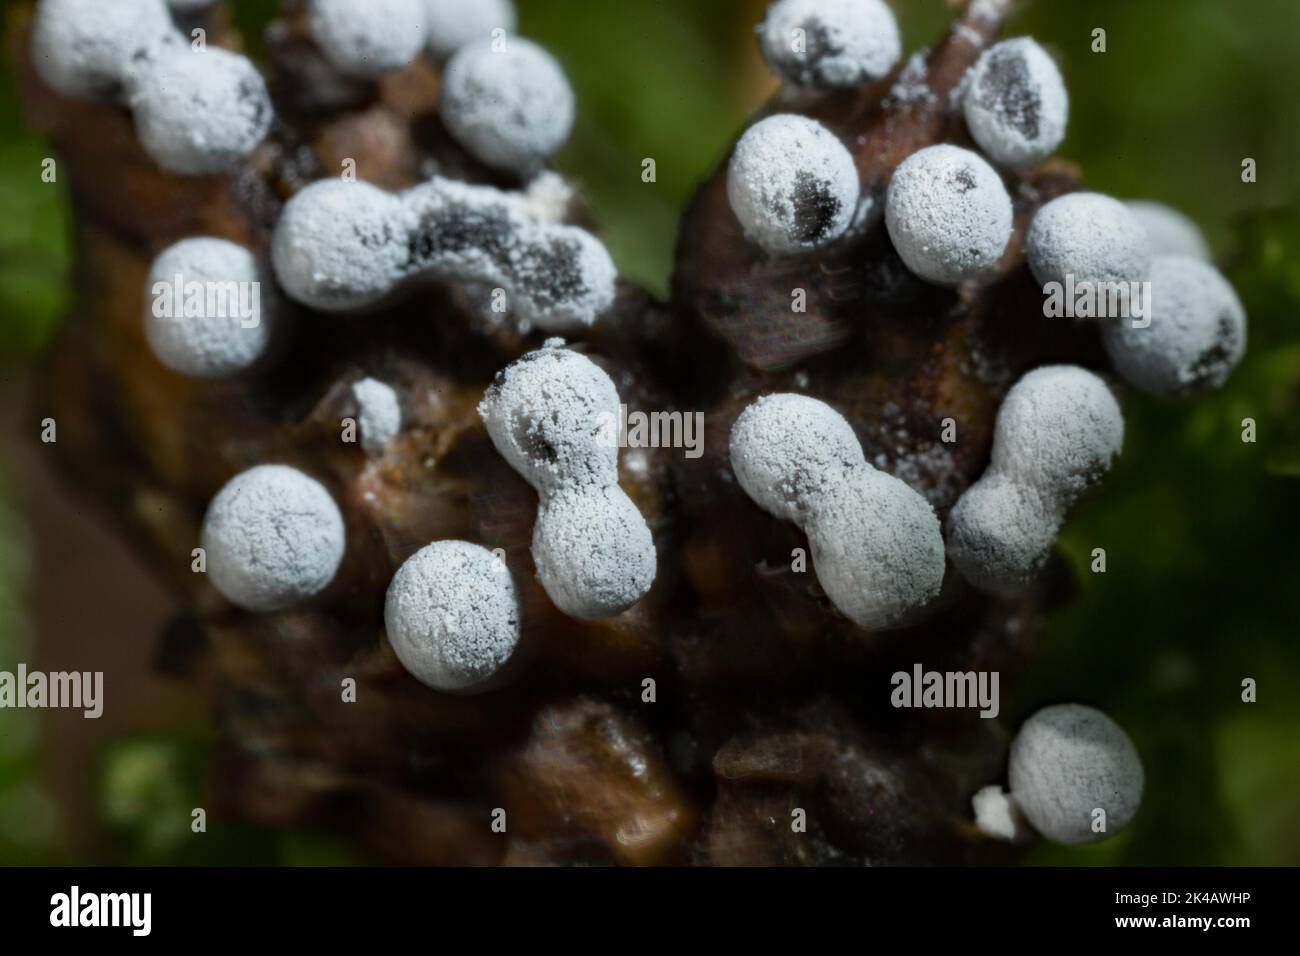 Grey ball slime mould several spherical greyish fruiting bodies next to each other on a small nest Stock Photo